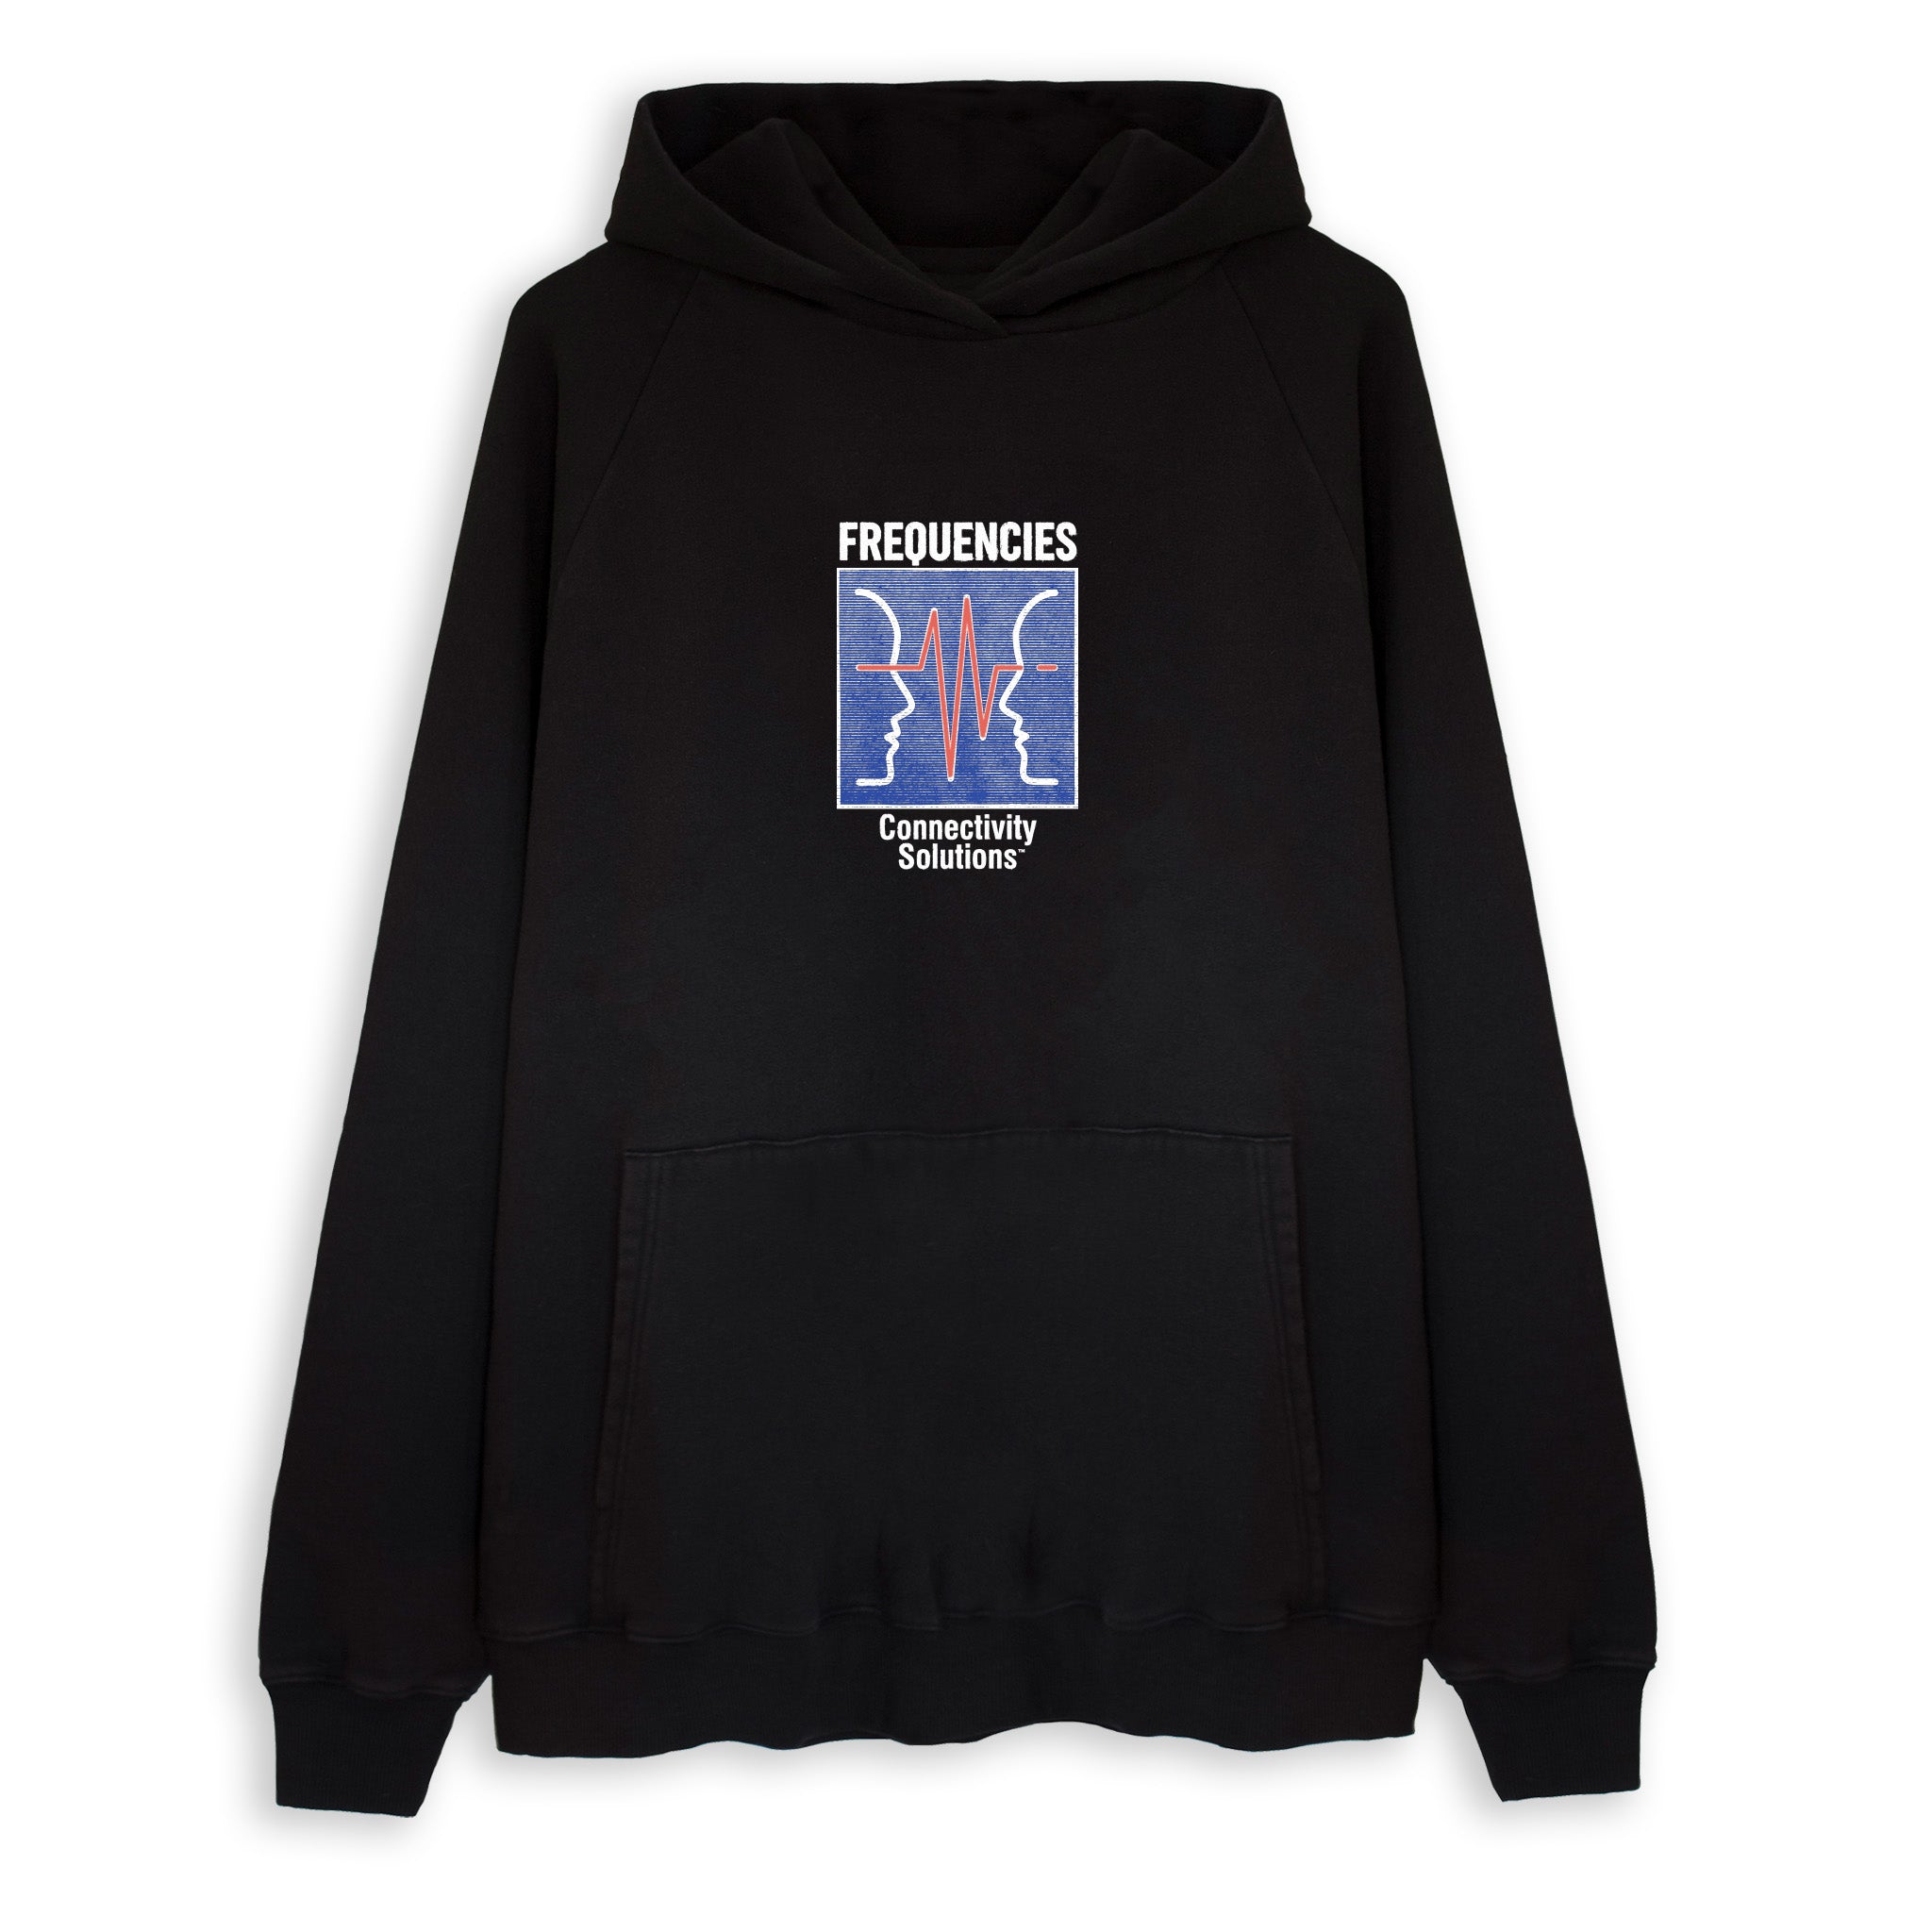 CONNECTIVITY SOLUTIONS HOODY - BLACK